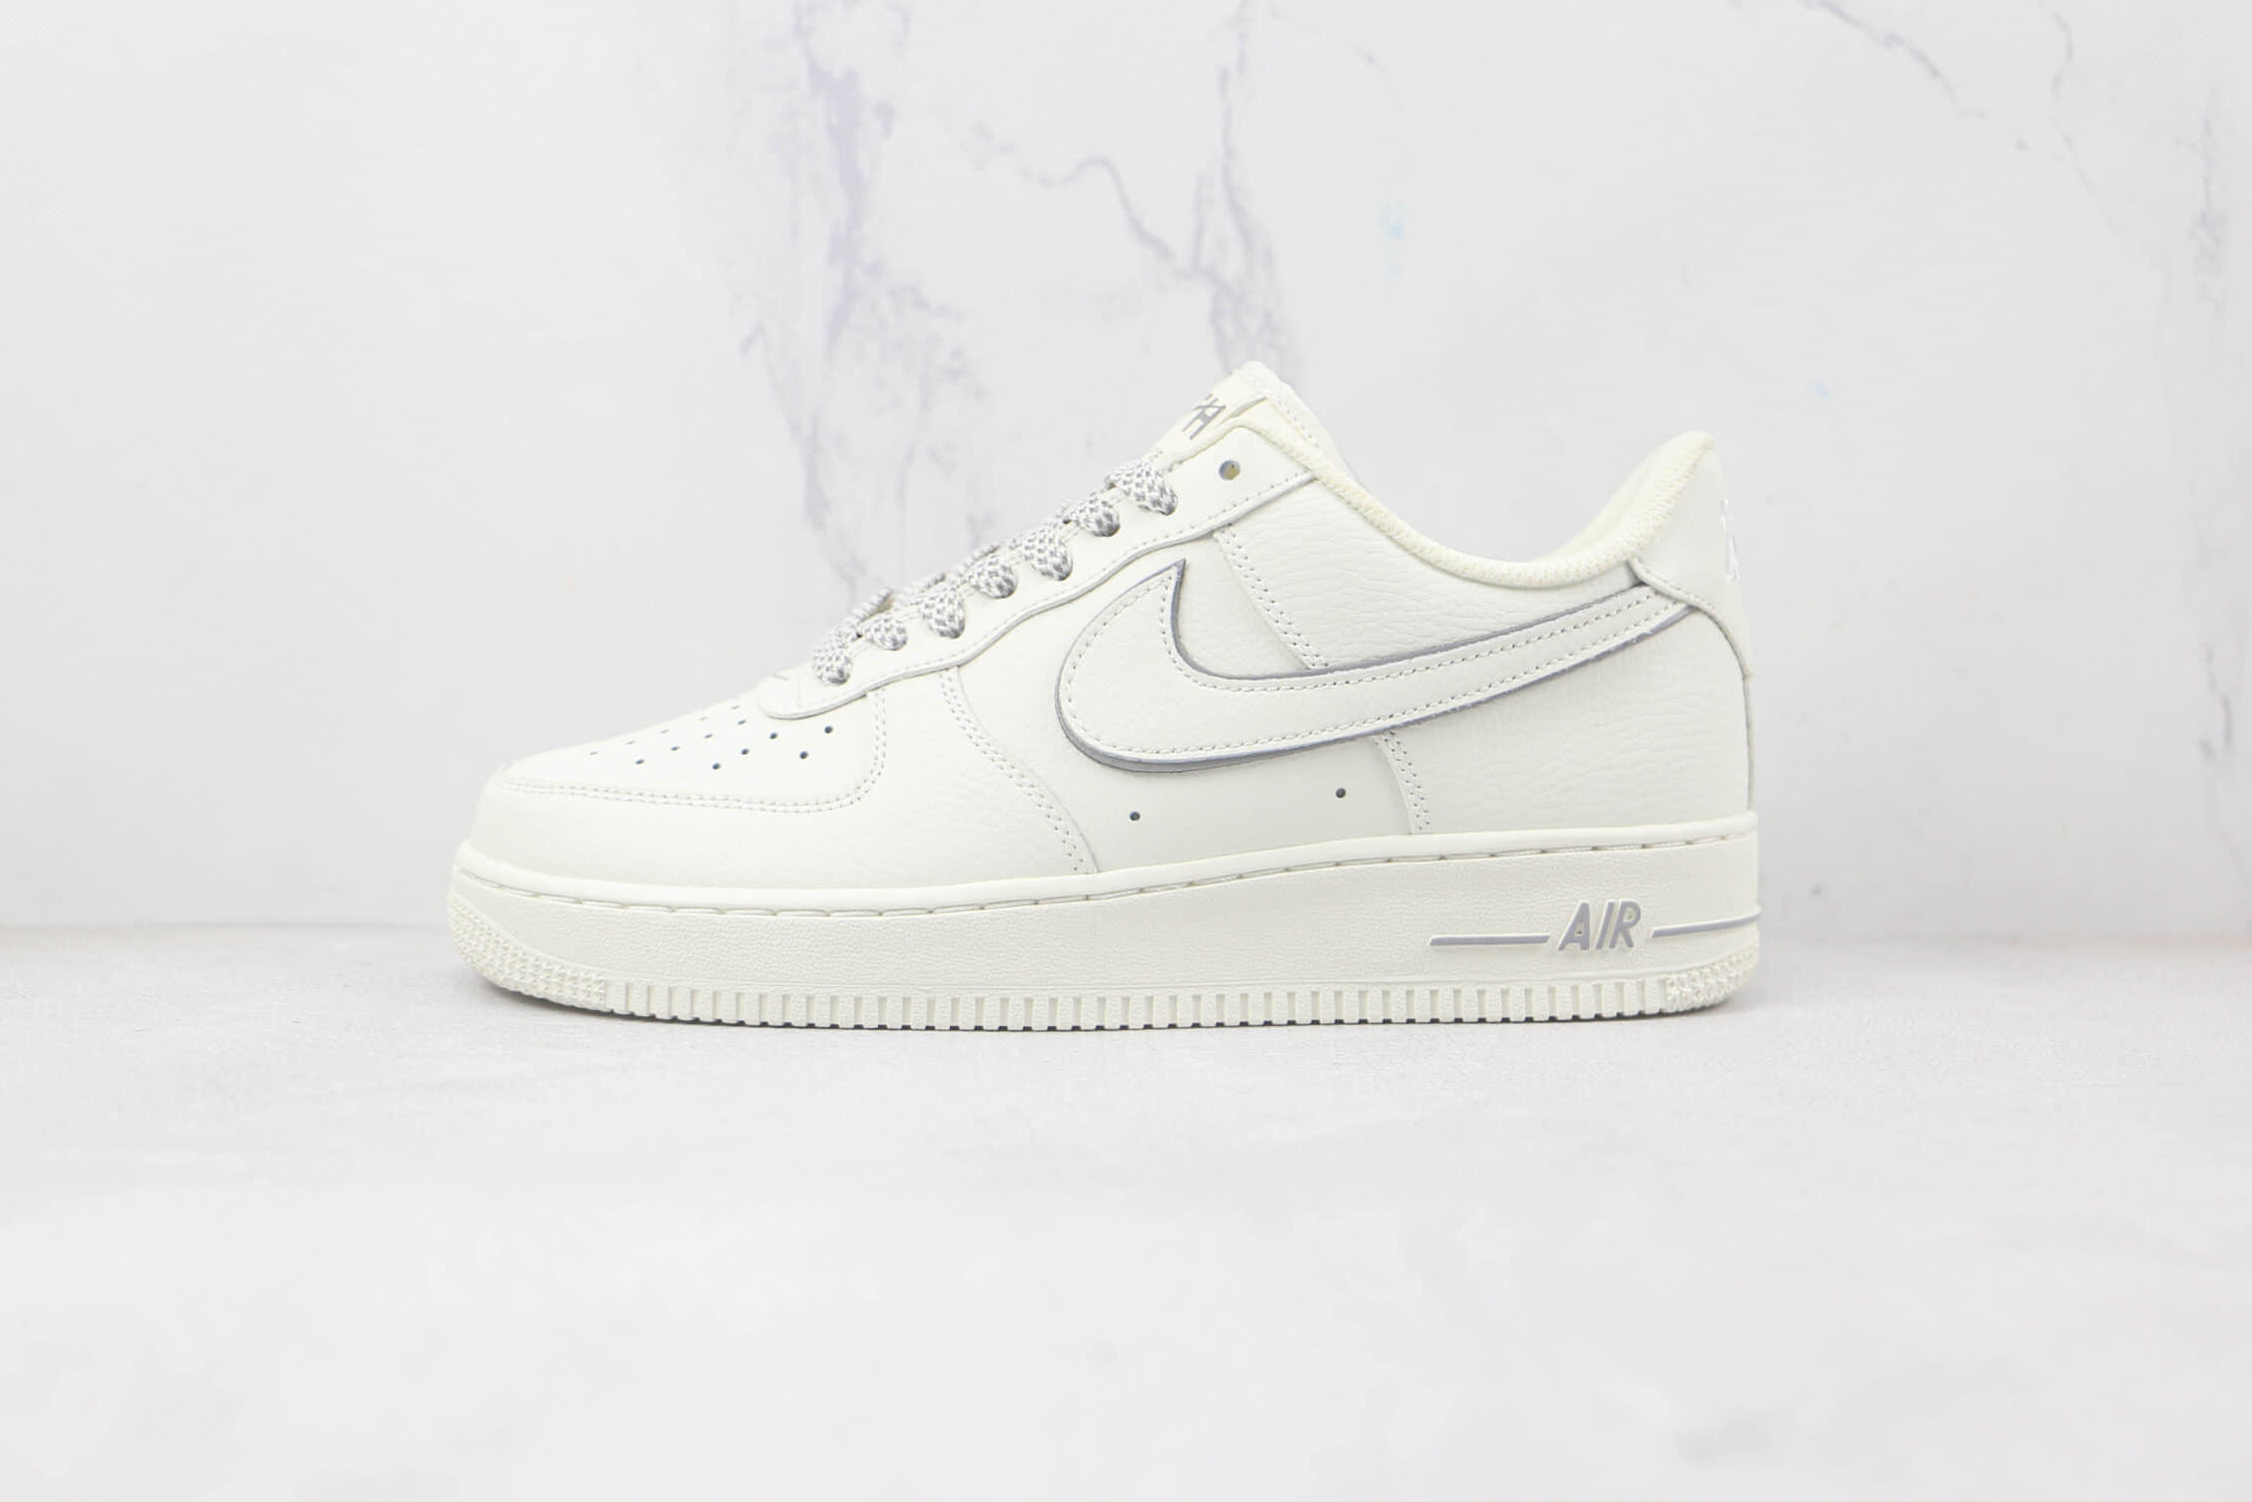 Kith x Nike Air Force 1 07 Low Rice White Metallic Sliver NY2022-017 - Latest Collaboration With Sleek Design